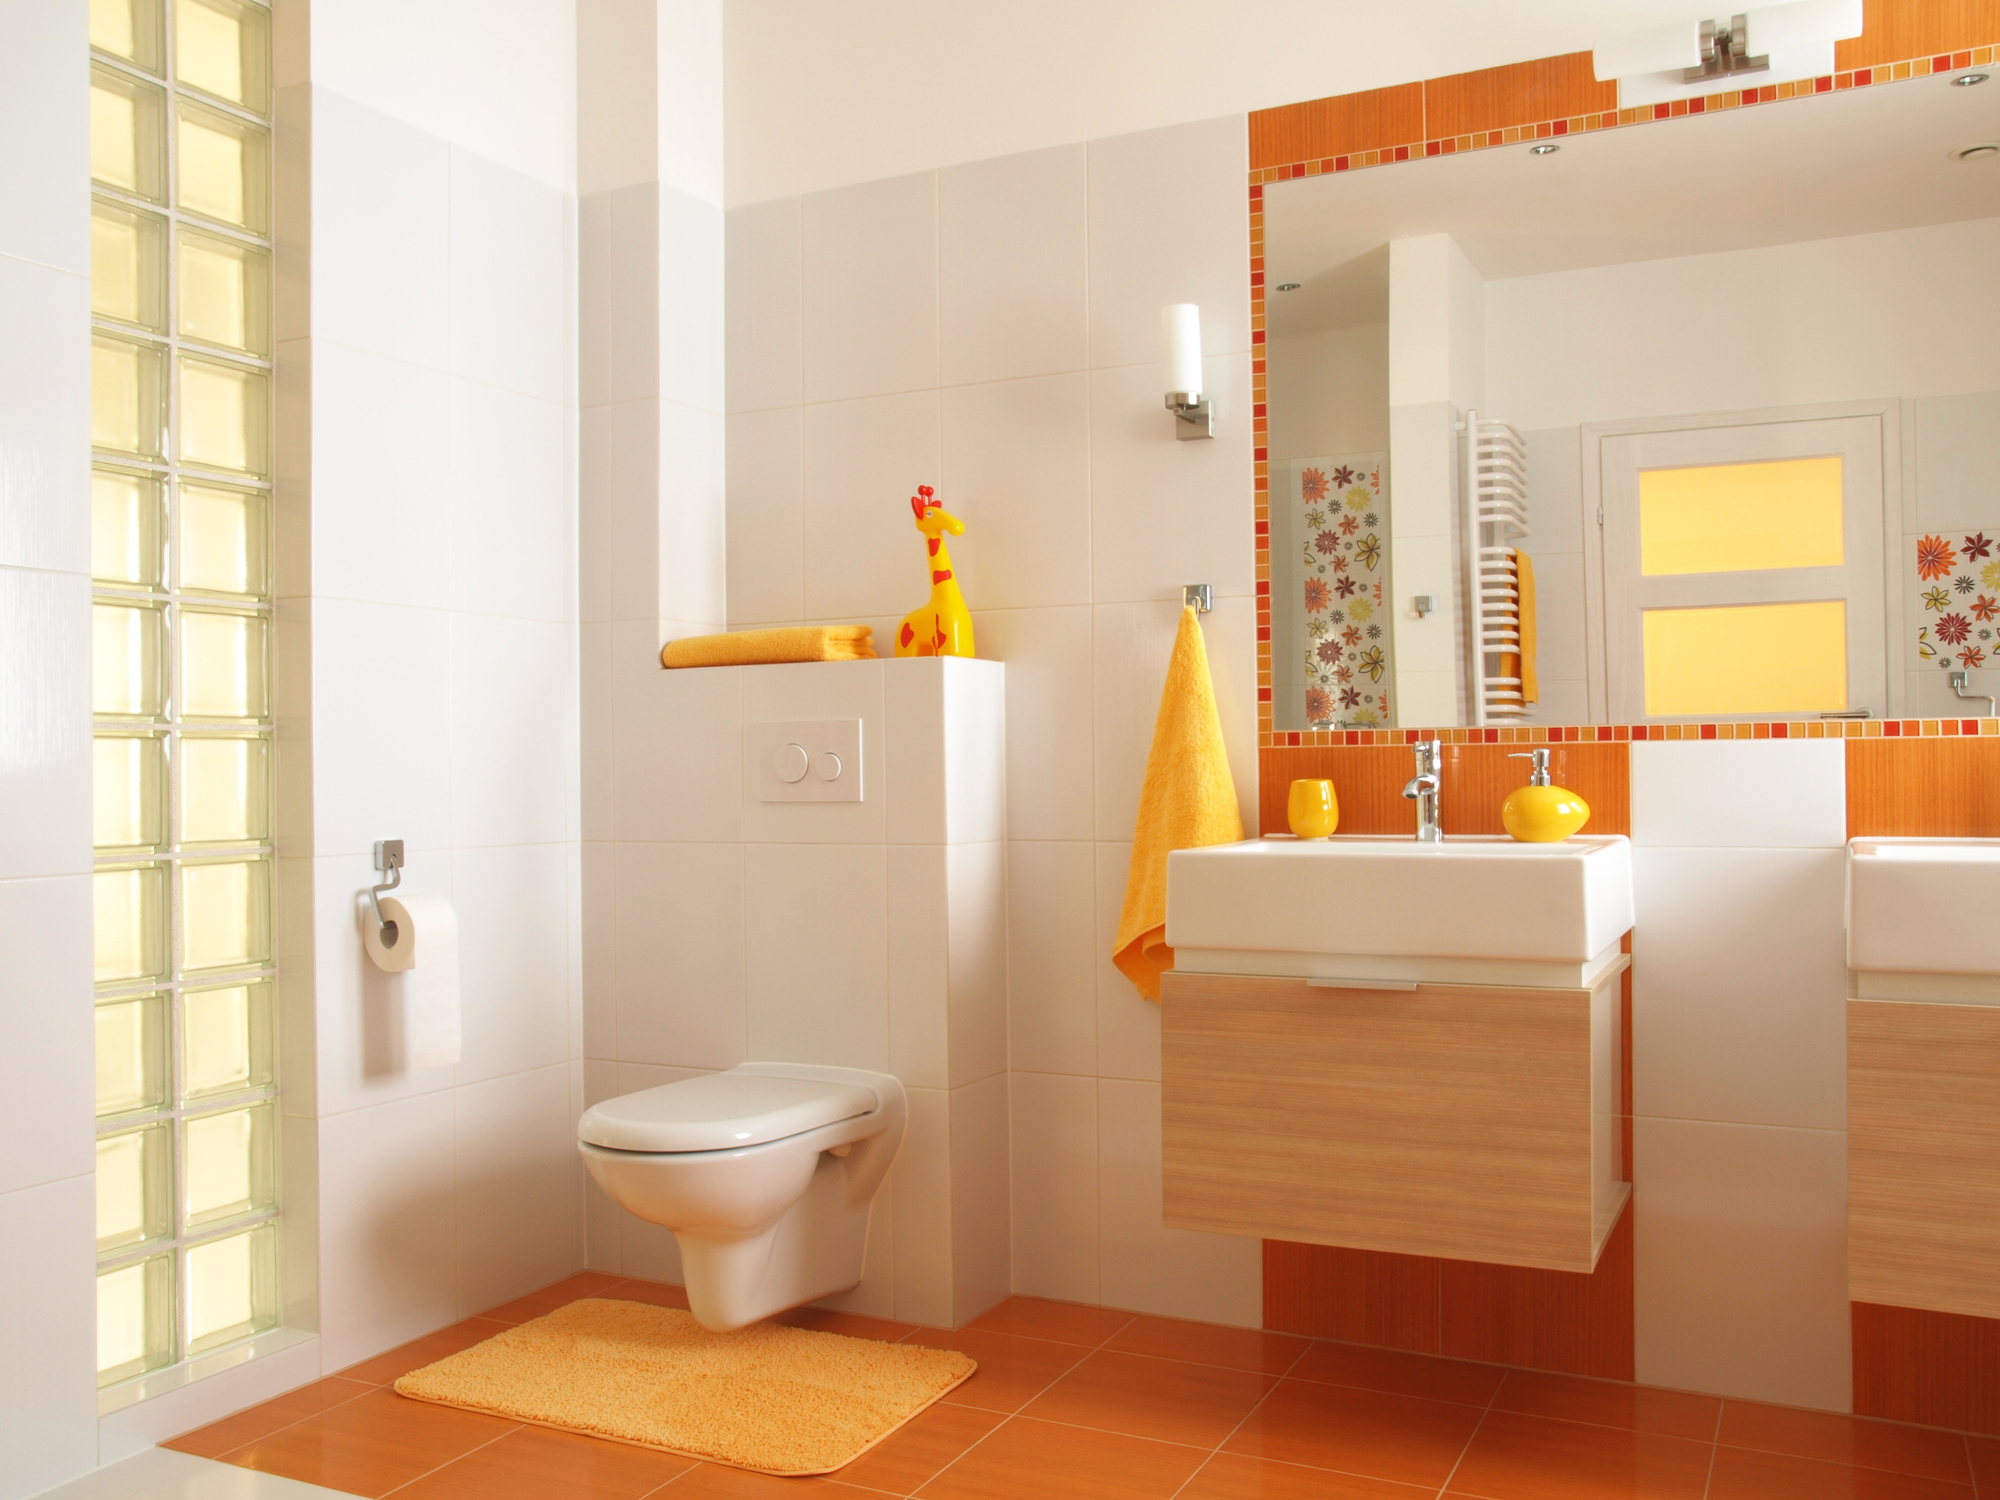 A colorful bathroom with orange tile flooring and orange and yellow accents.